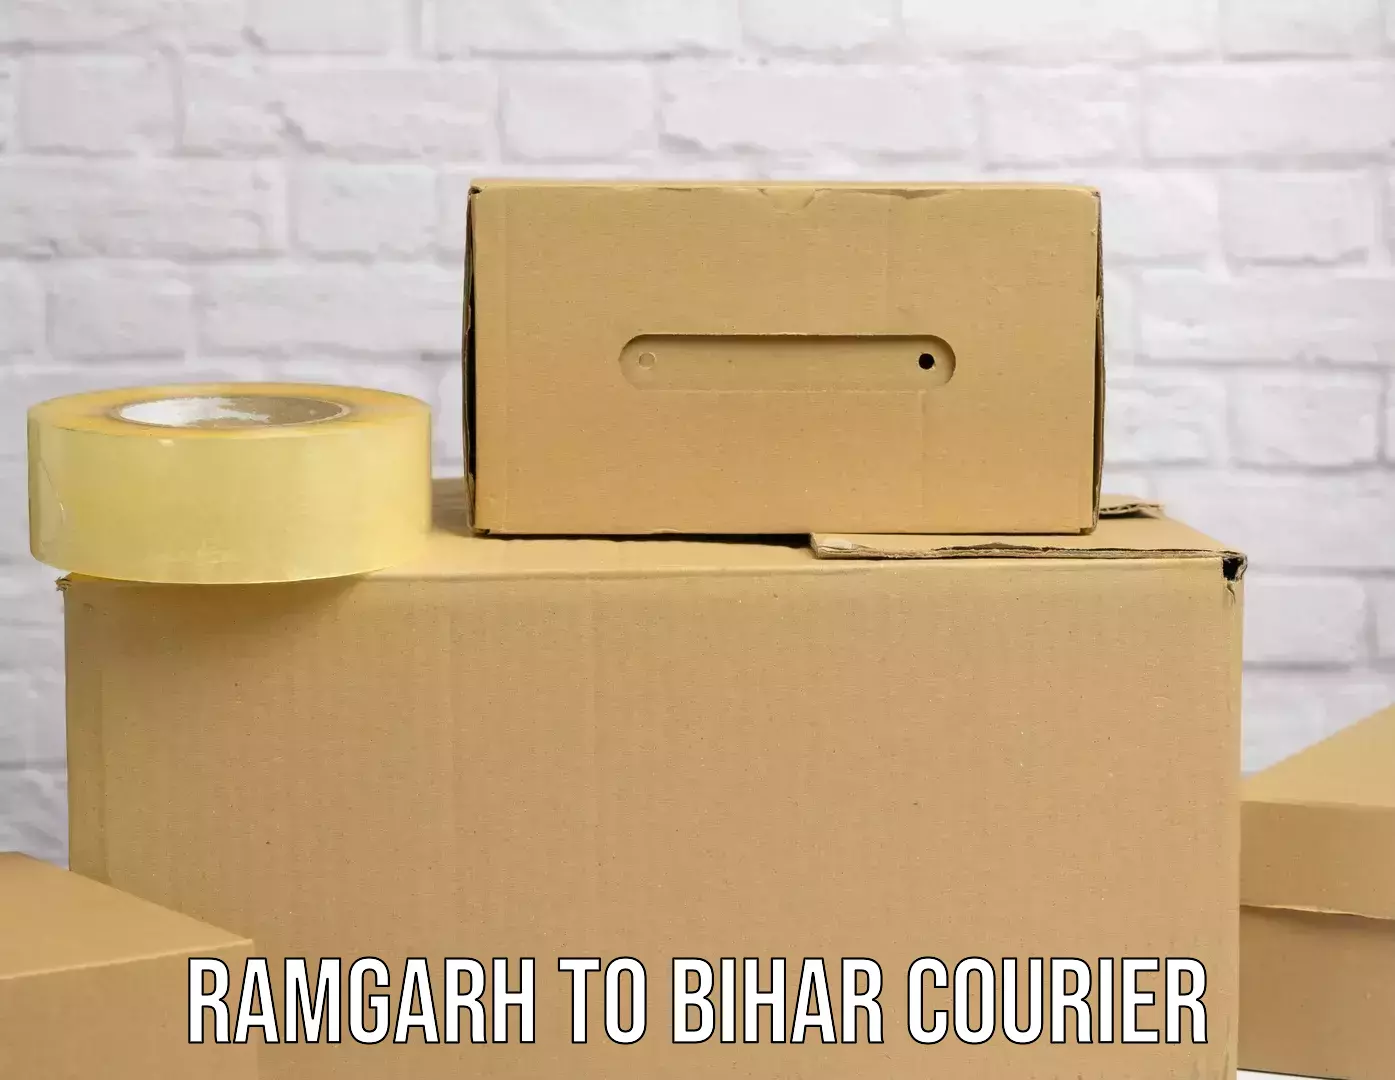 Supply chain delivery Ramgarh to Imamganj